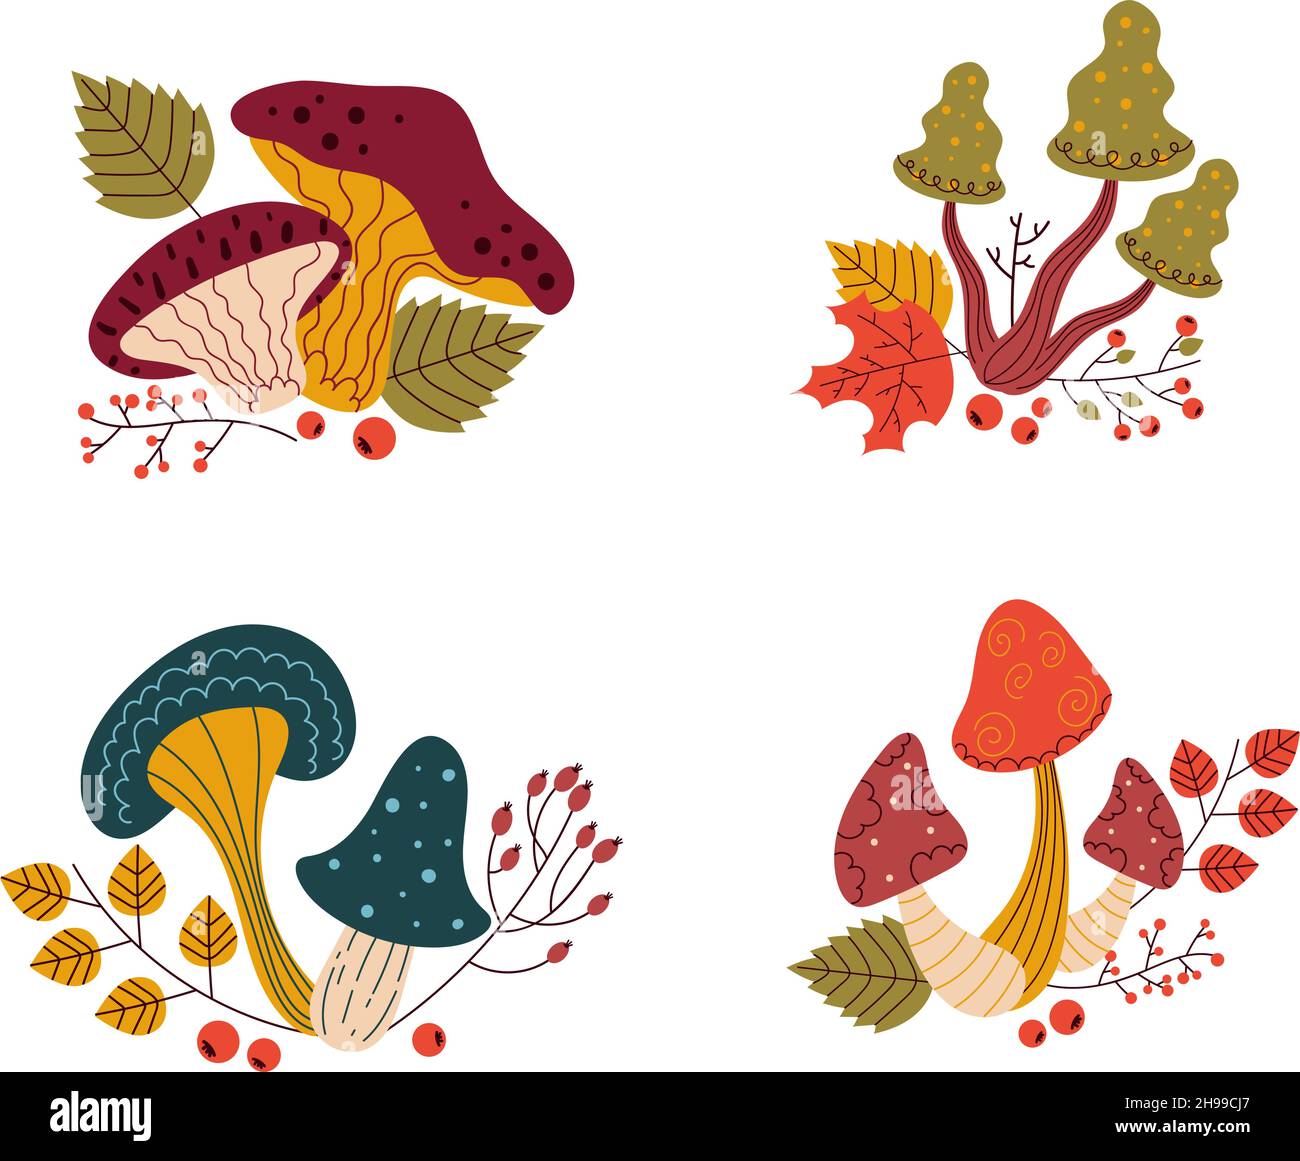 Mushrooms compositions. Cartoon funguses with twigs, berries and leaves. Organic diet vegetable products. Autumn harvest. Poisonous or edible plants Stock Vector